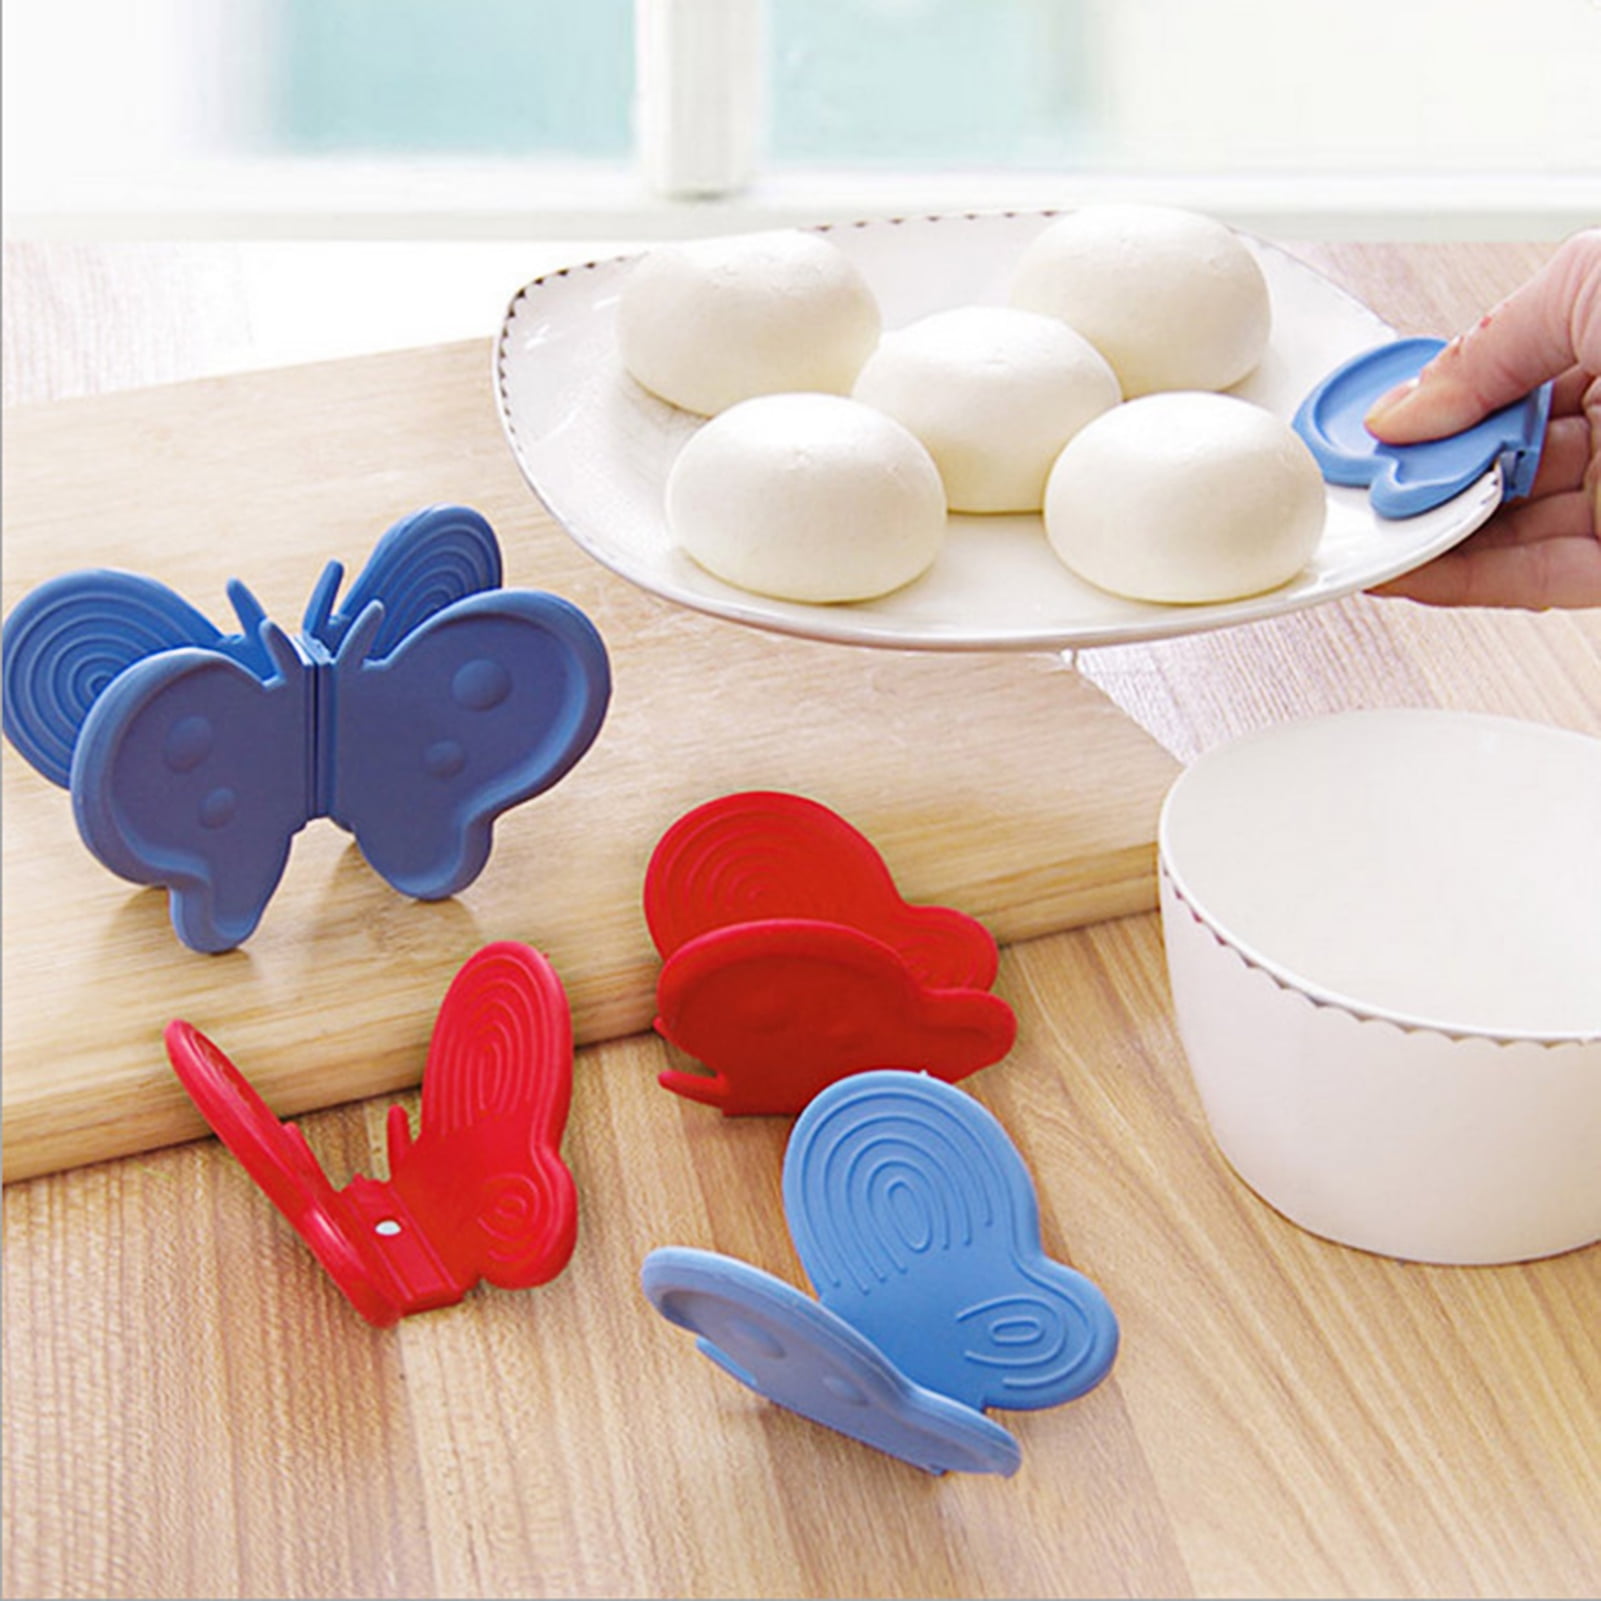 Butterfly Silicone Pot Holders from Apollo Box